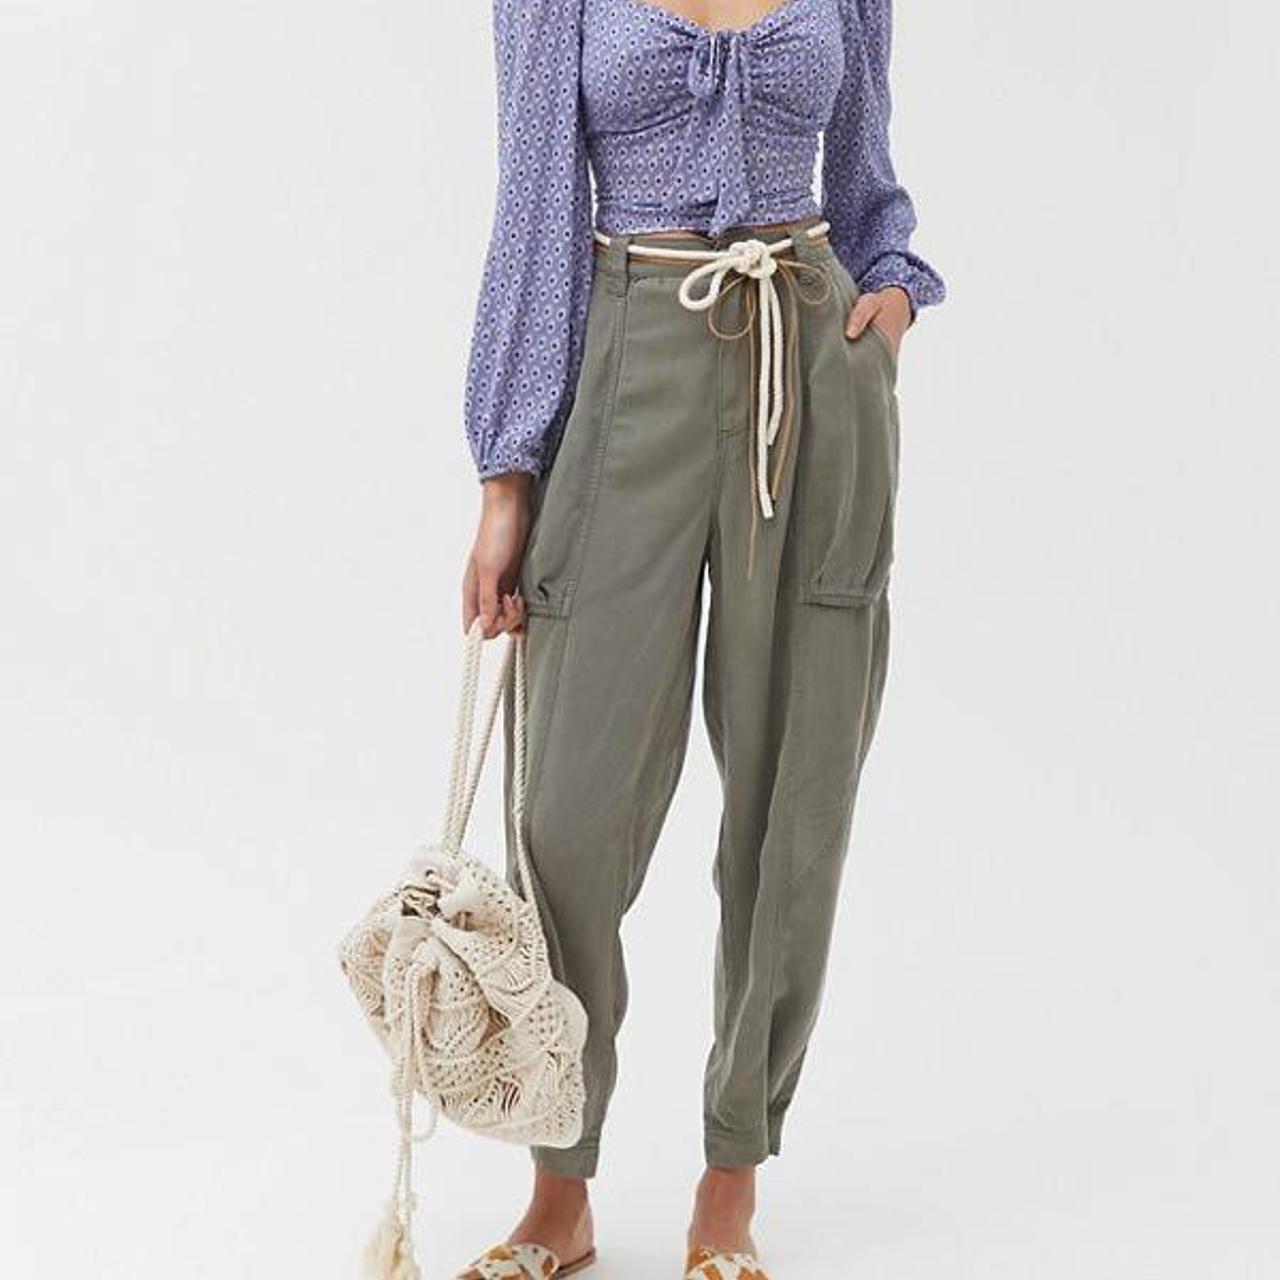 Urban Outfitters Women's Khaki and Green Trousers (2)